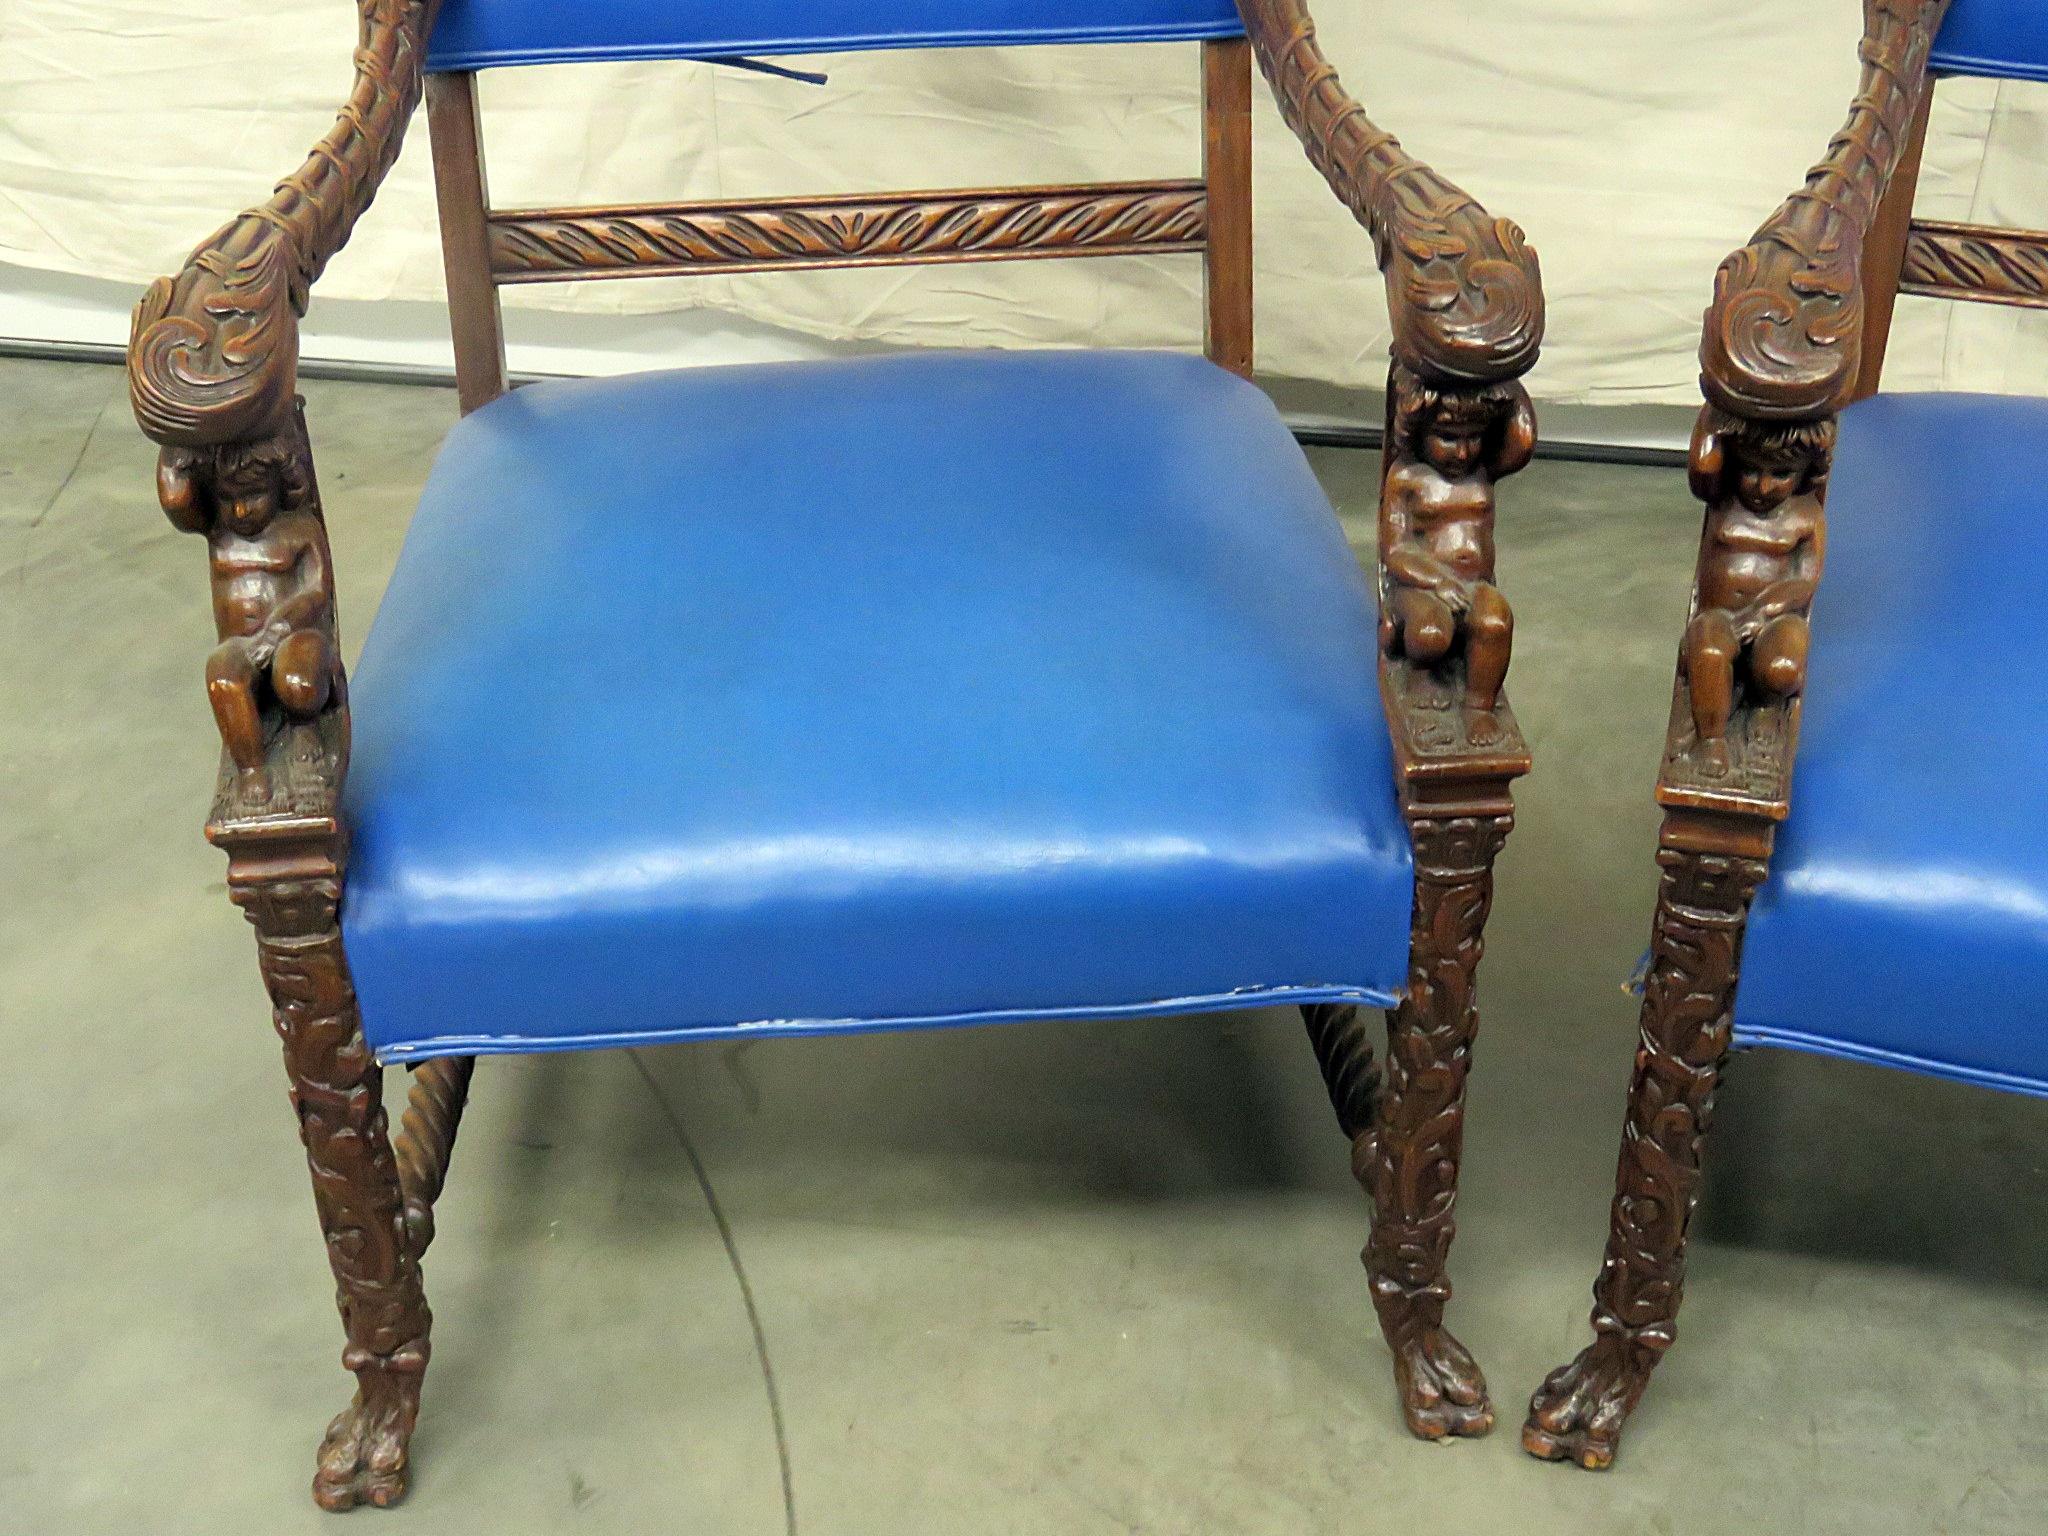 Pair of Renaissance style carved throne chairs, attributed to Horner, with cherubs, paw feet and leather upholstery.